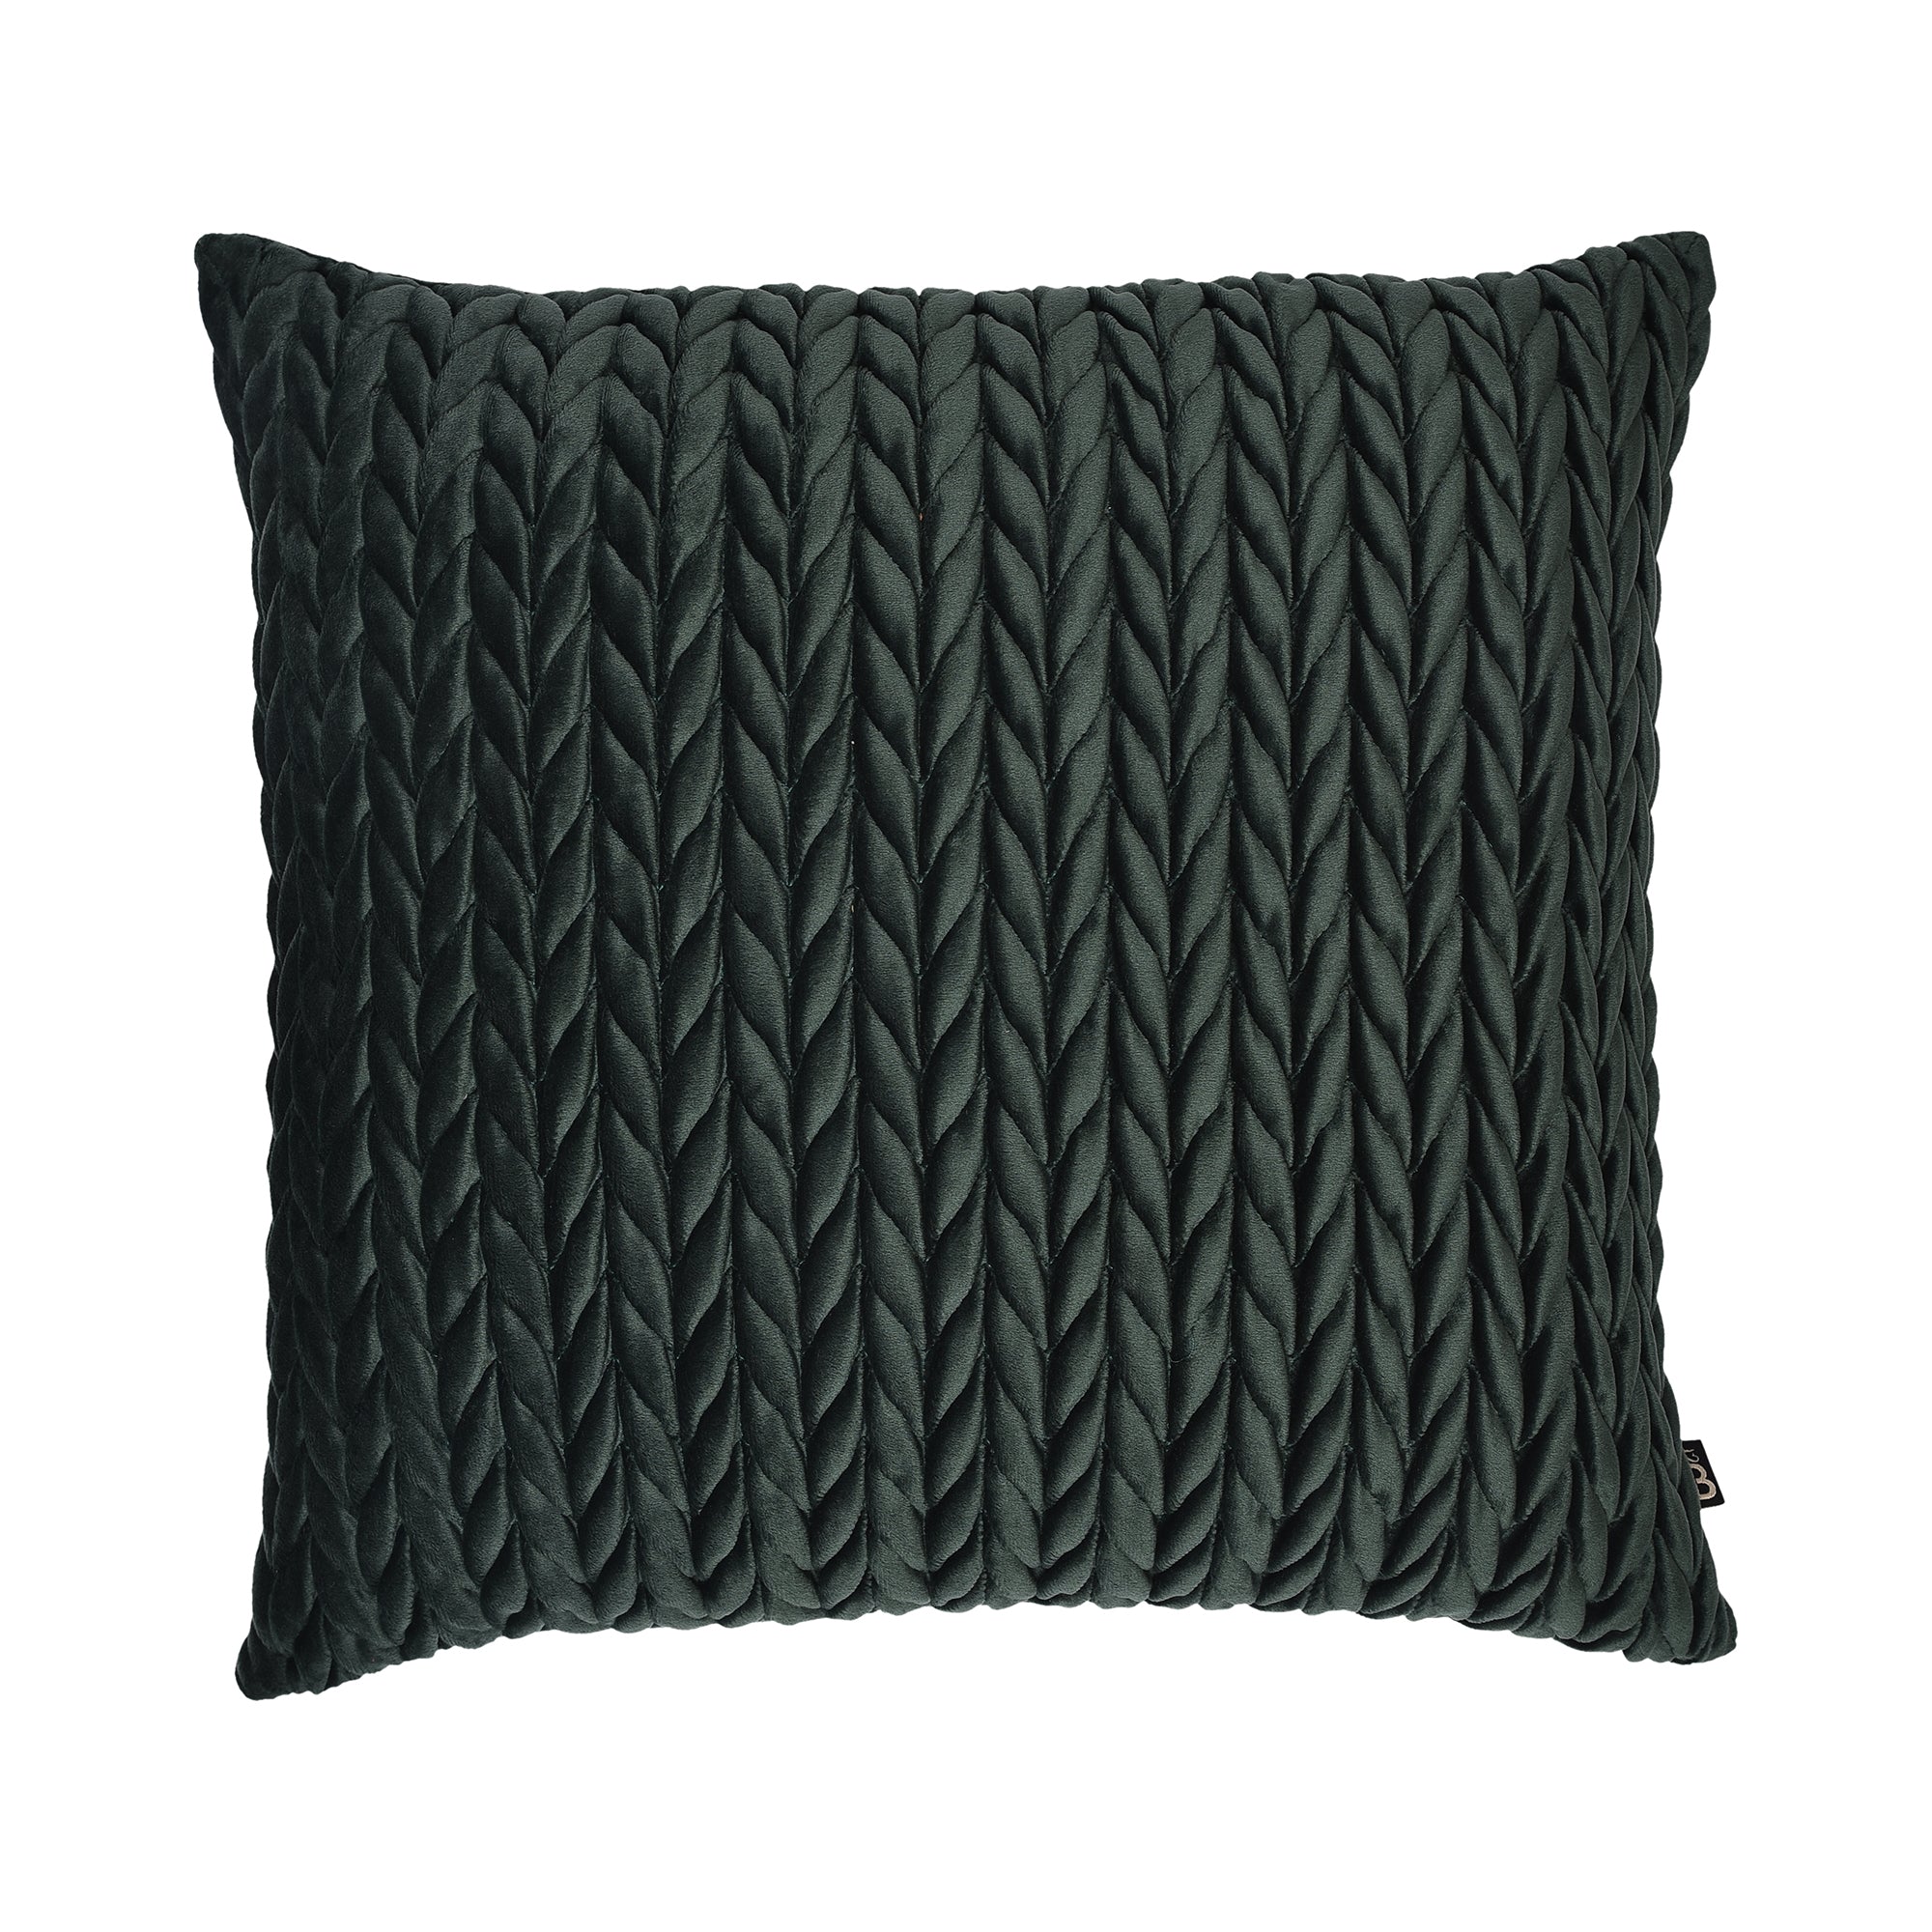 Amory Cushion by Laurence Llewelyn-Bowen in Bottle Green 43 x 43cm - Cushion - Laurence Llewelyn-Bowen